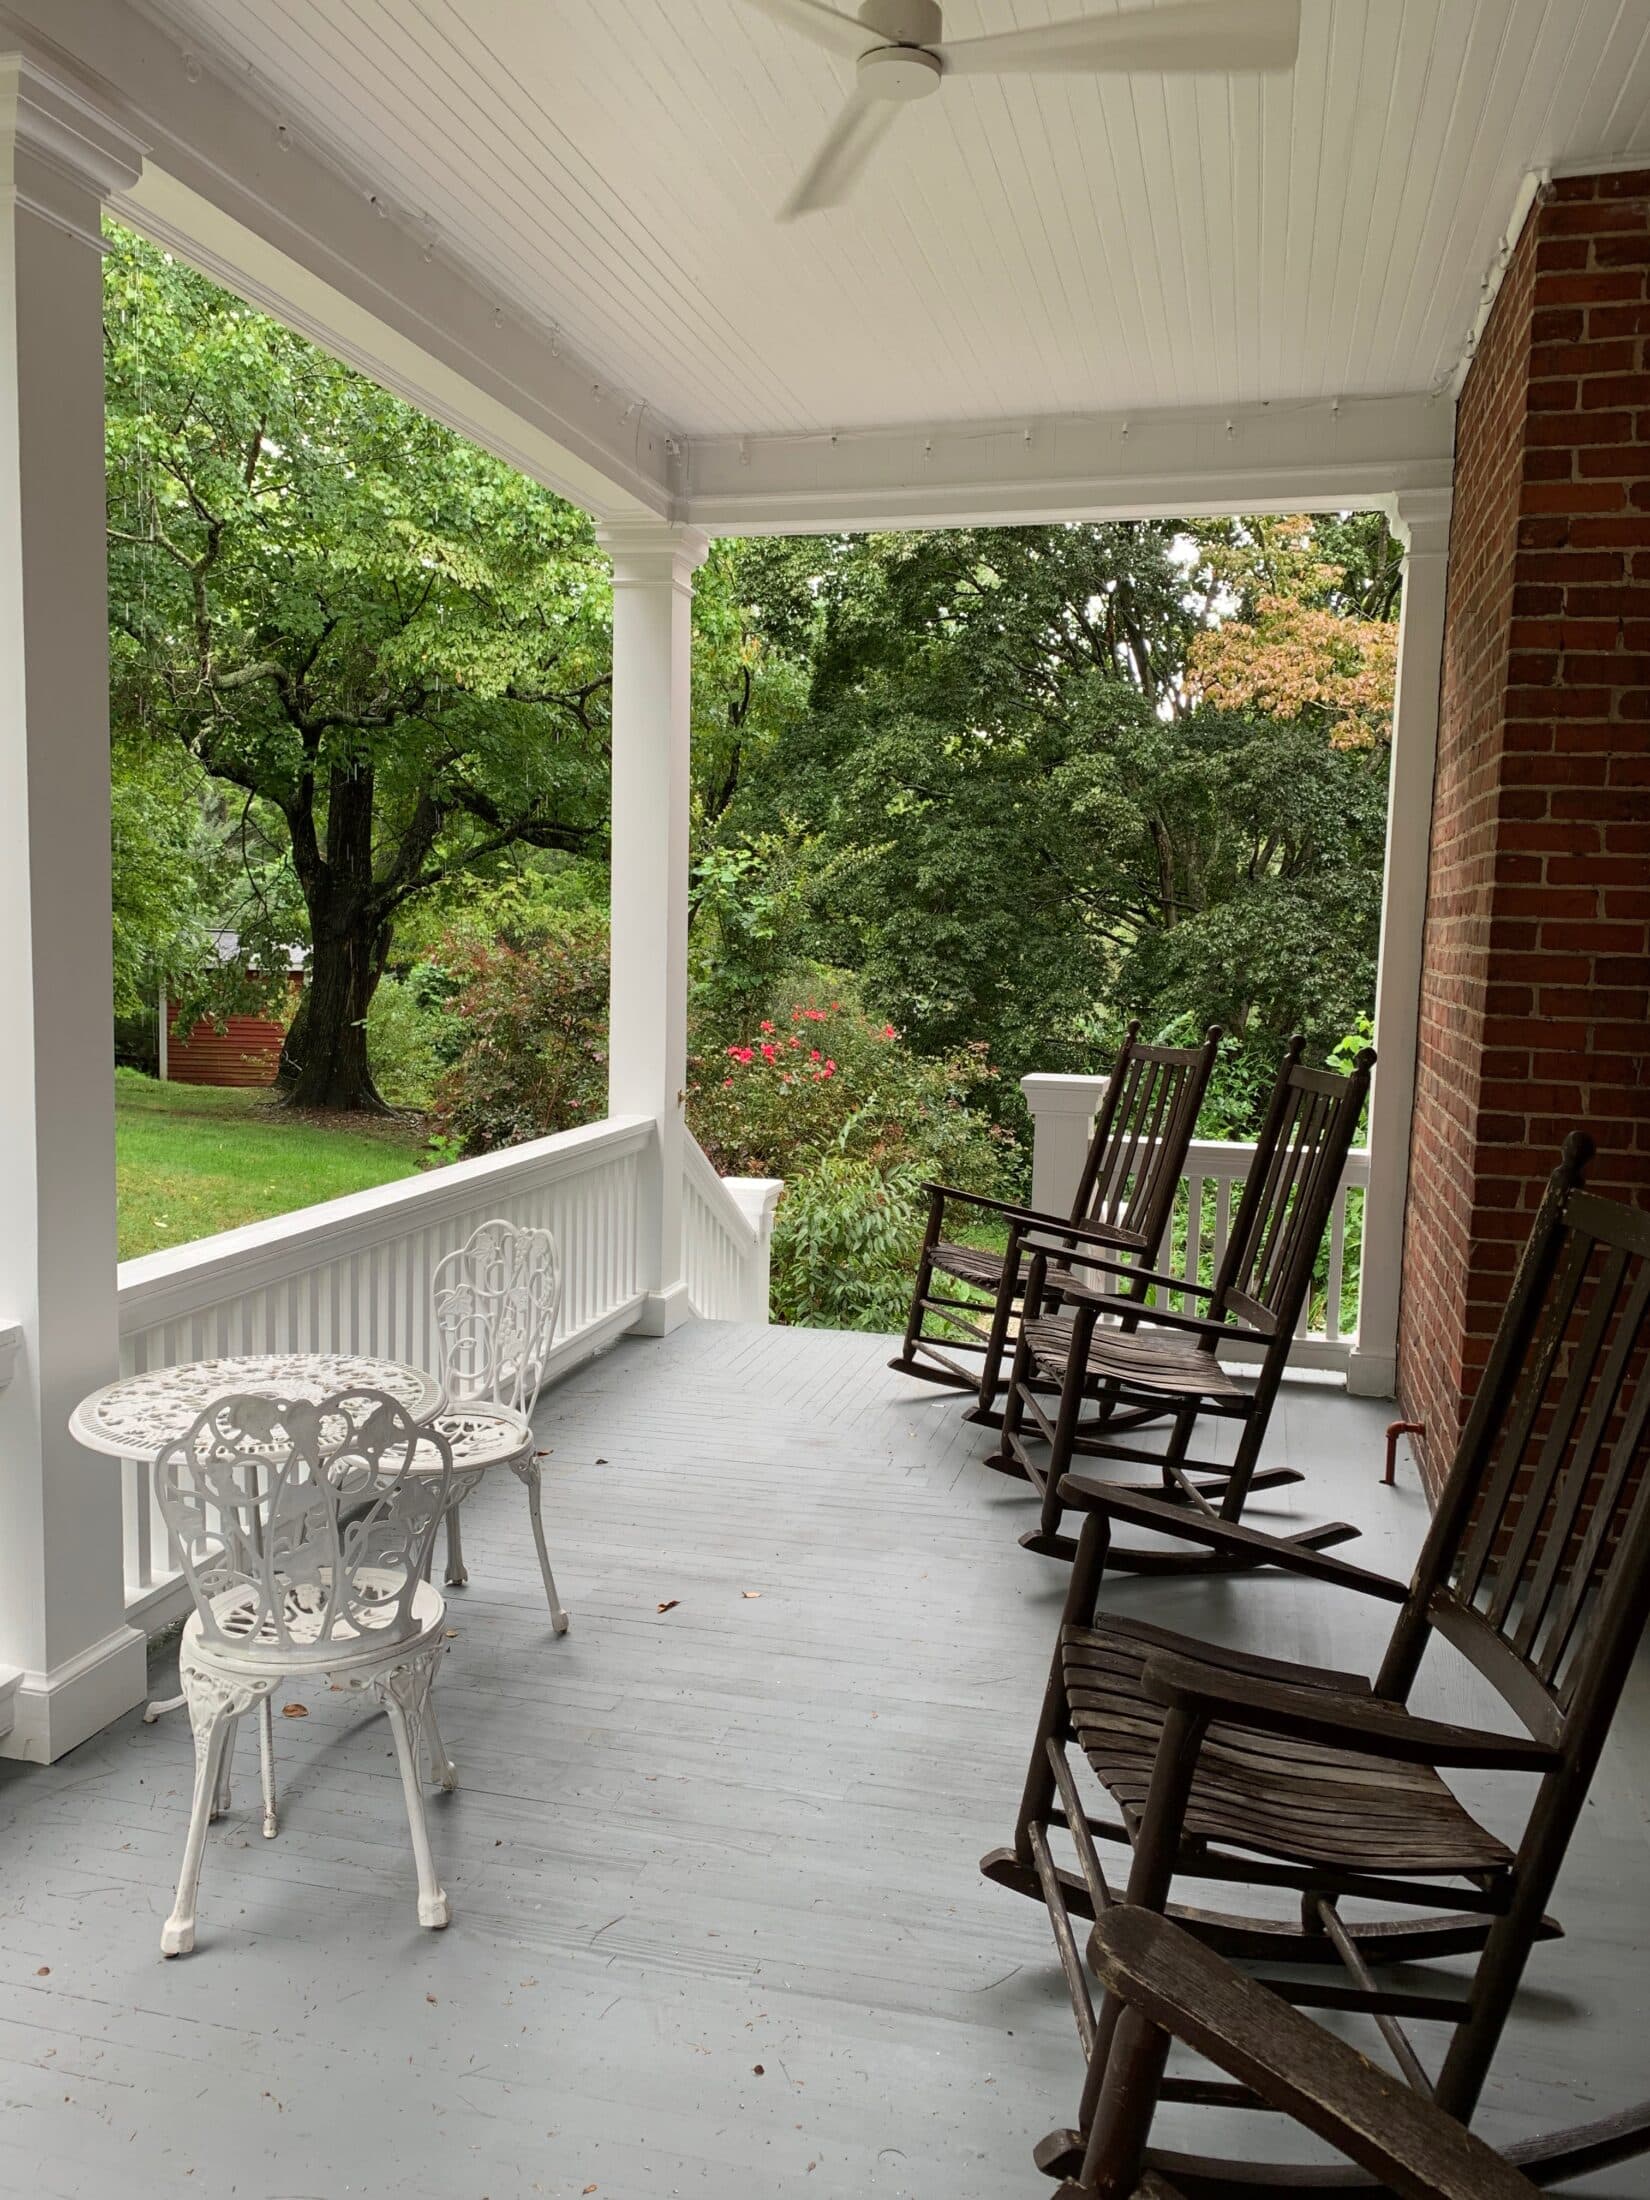 APPLEWOOD PORCHES, The Applewood Manor